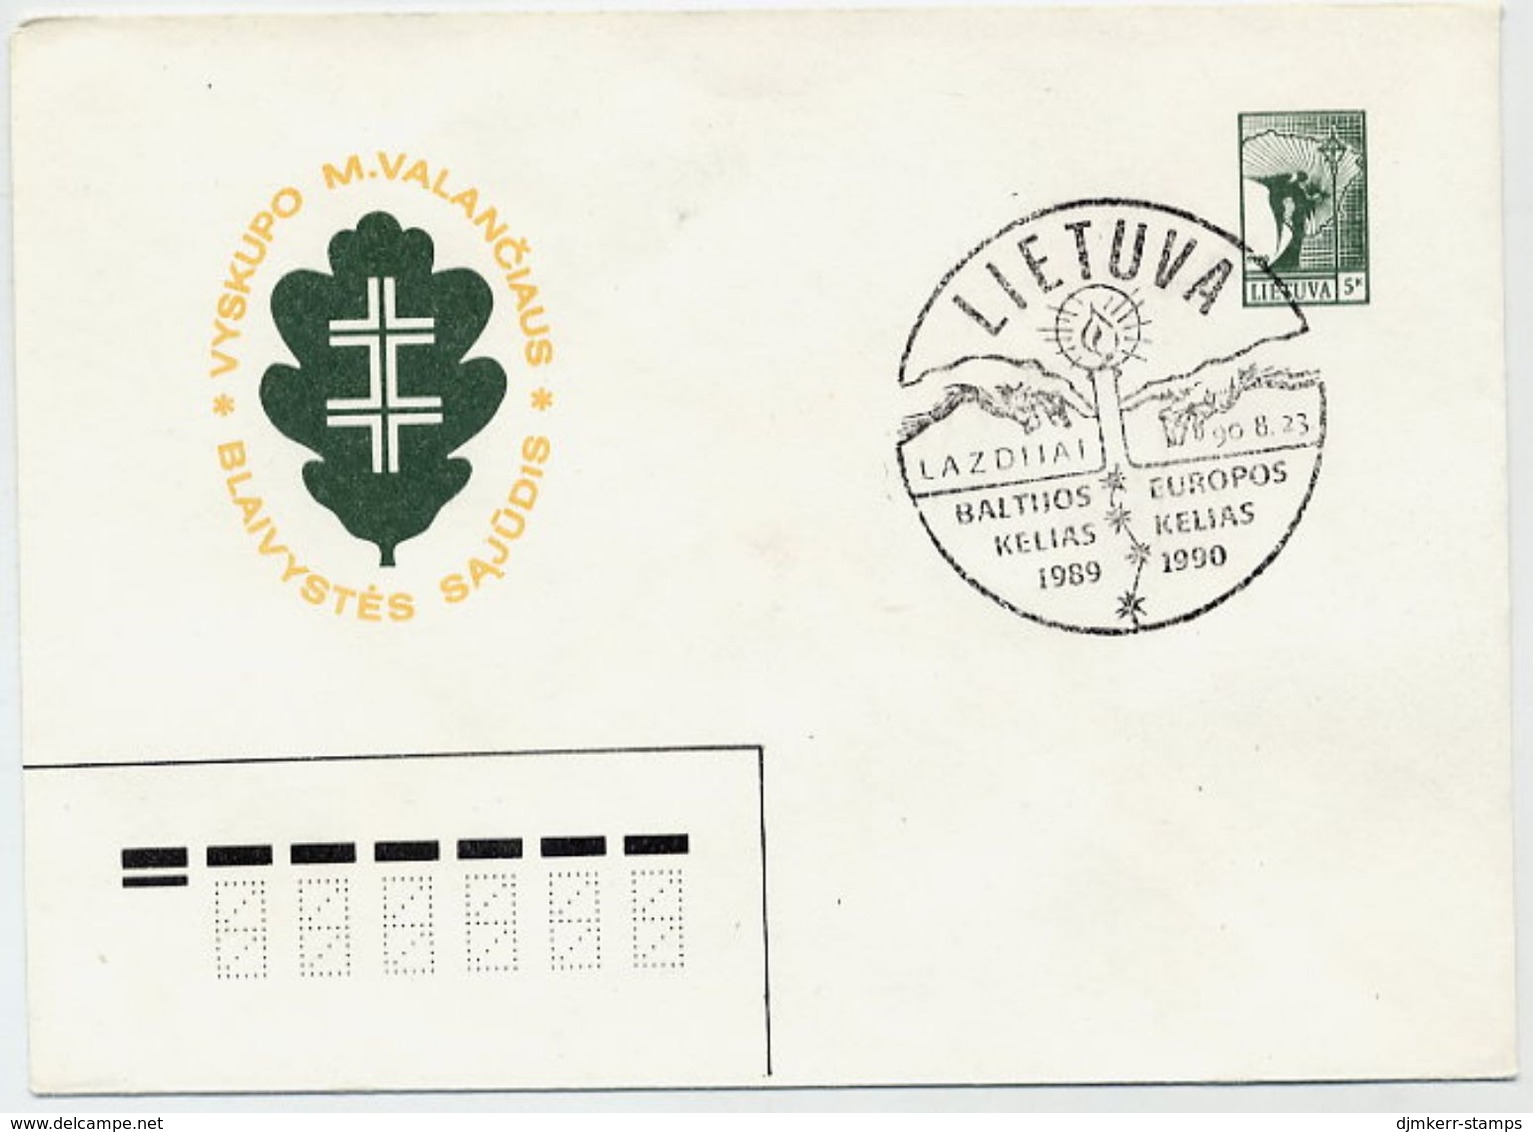 LITHUANIA 1990 Abstinence Movement Stationery Envelope, Cancelled.  Michel U6 - Lituanie